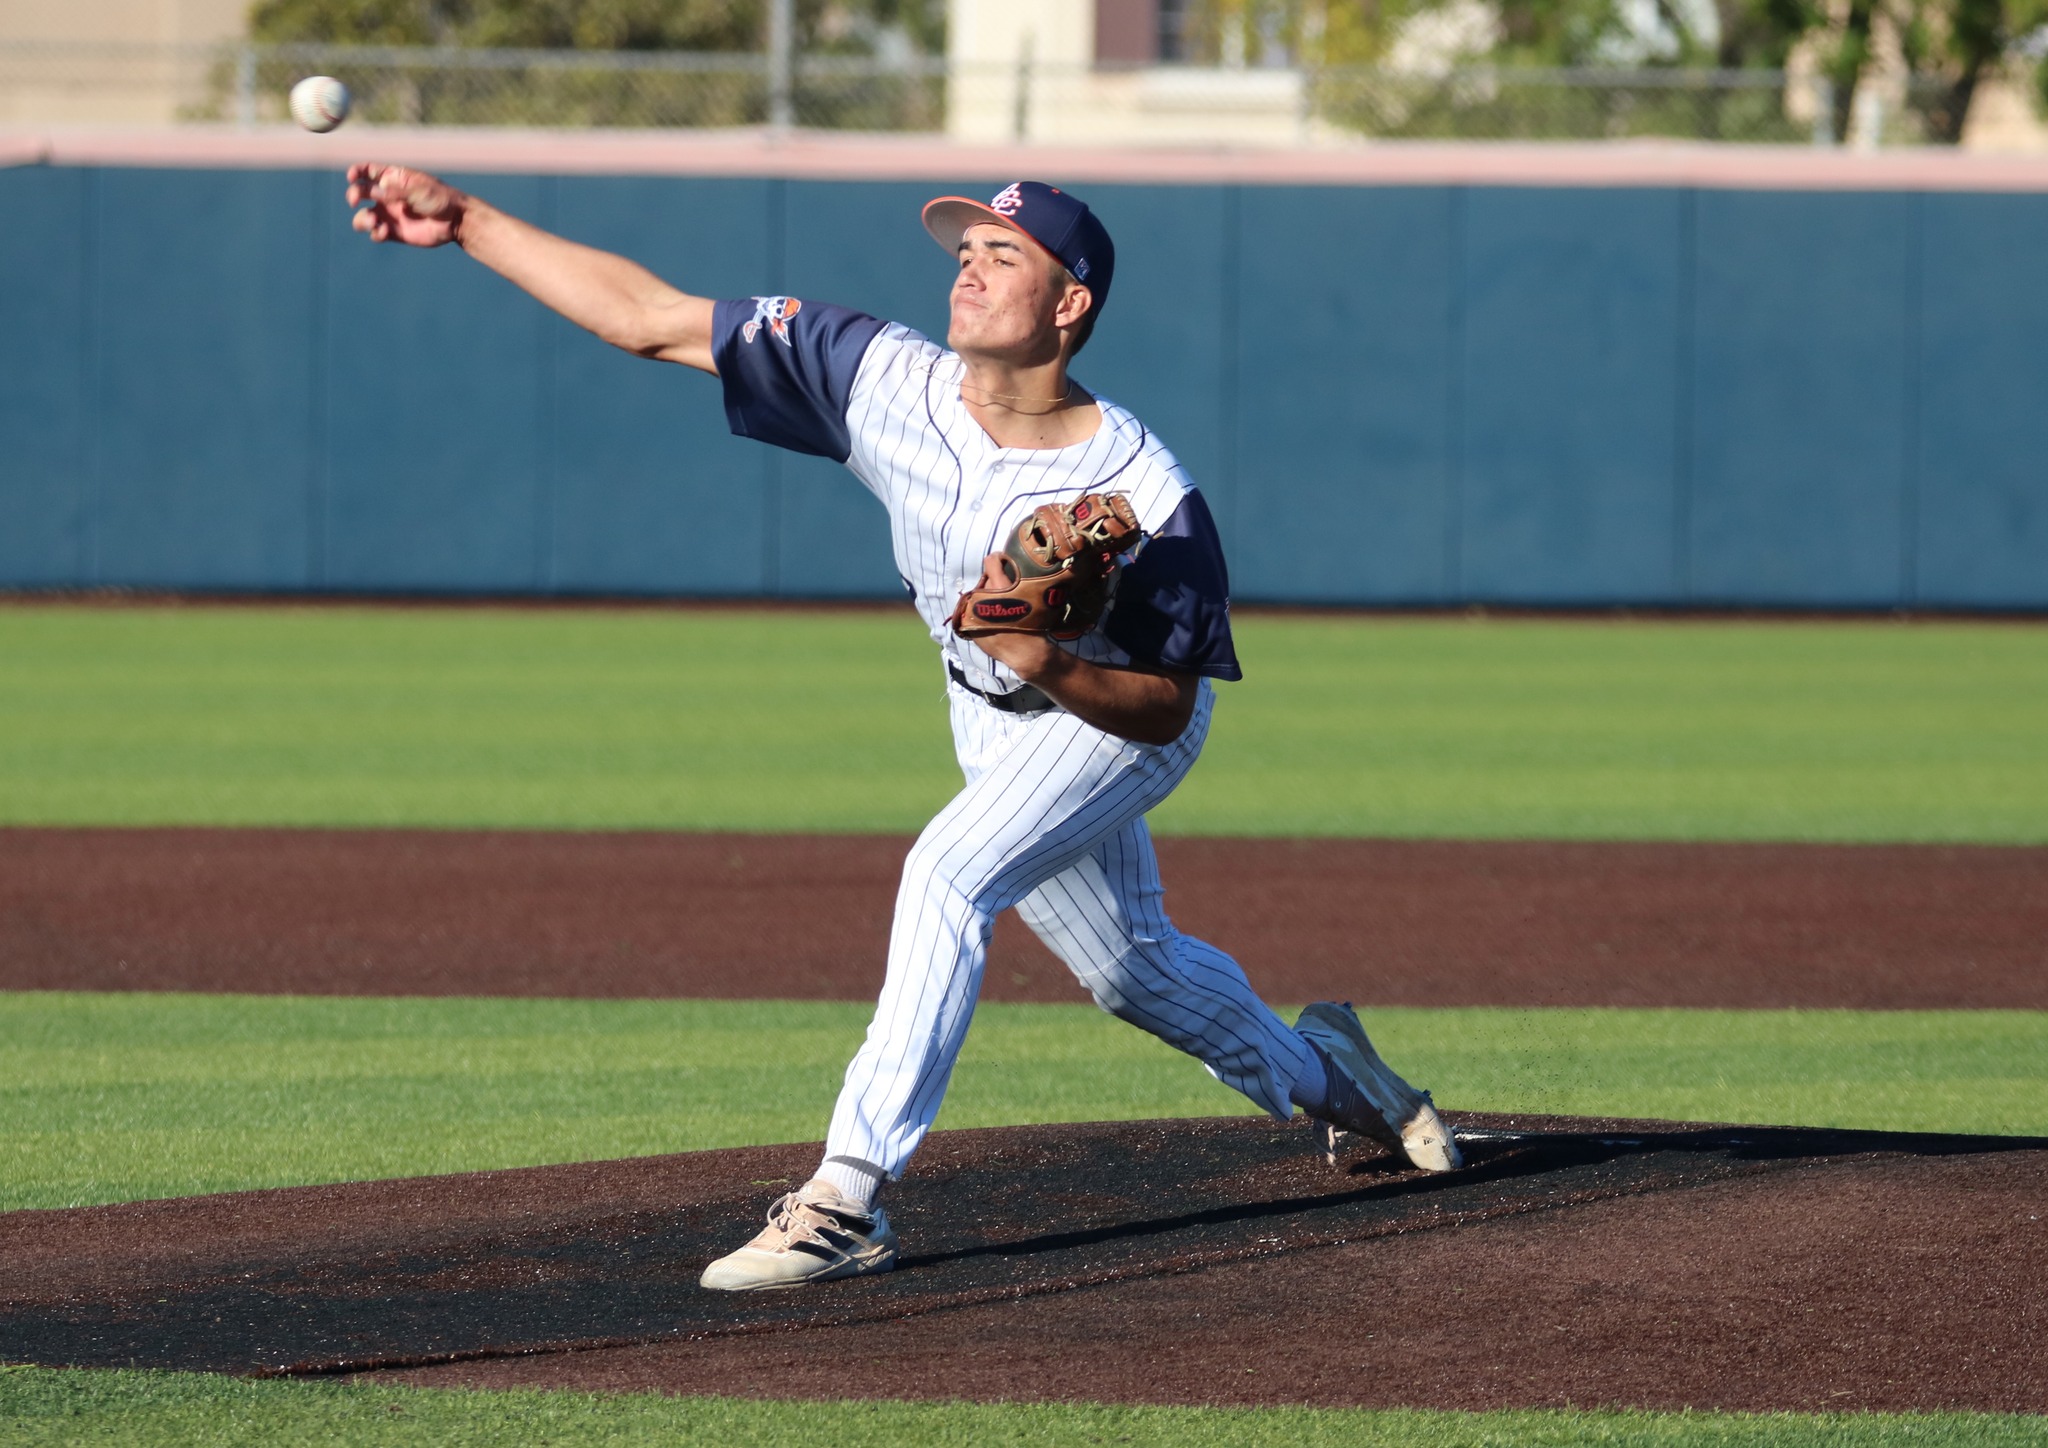 Pirates rally, hang on for 6-5 win over Cuesta